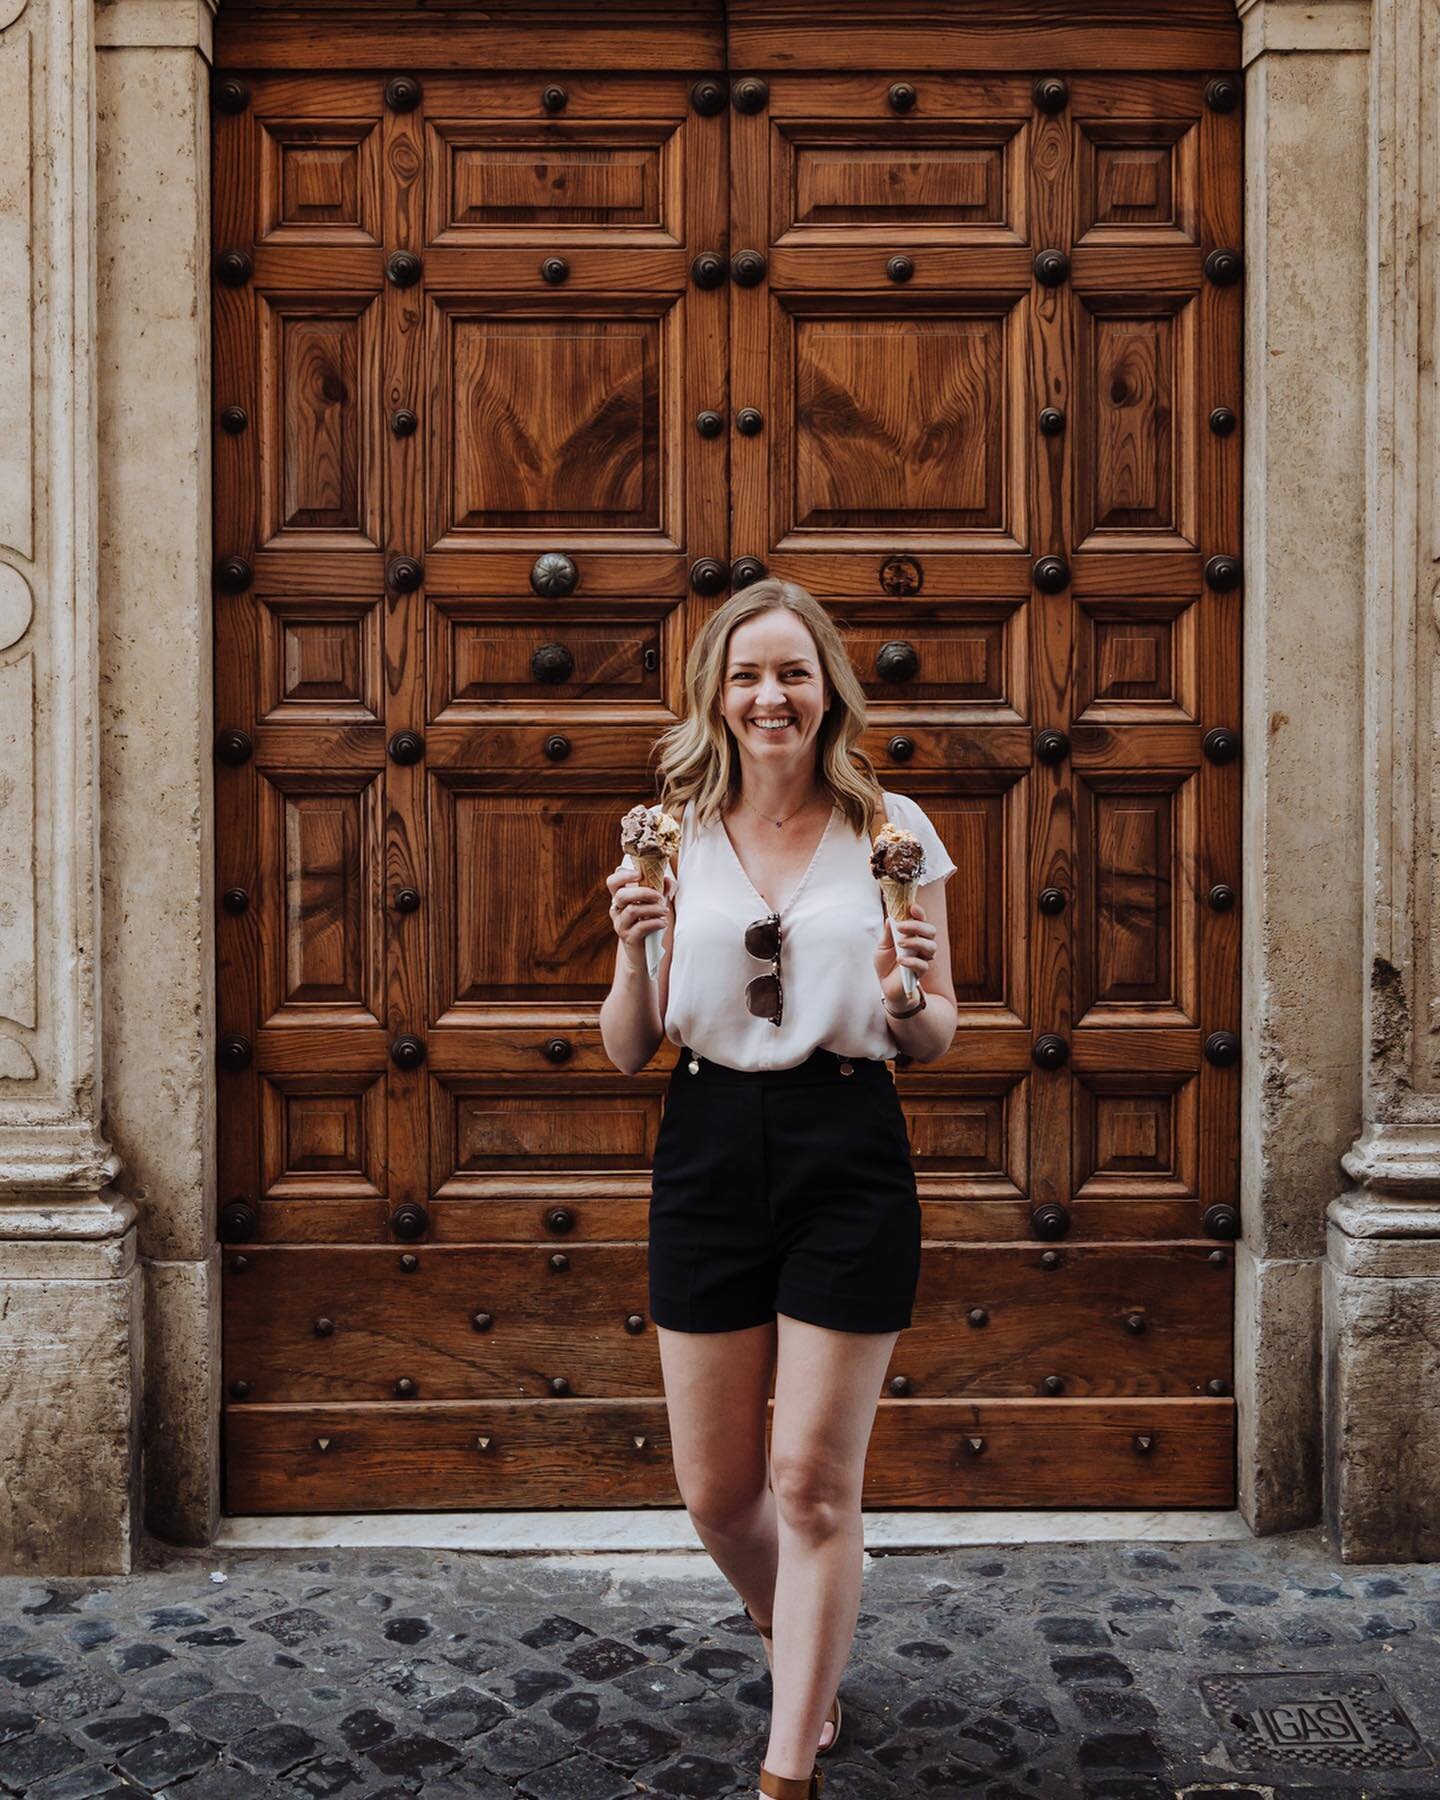 Me in Italy 👋🏻🍦✨

Five years ago, I visited Italy with my husband @mattkorinek. I took a loaned Nikon Z6 with an 24-70mm f/4 Z lens and created one of my favourite personal photos essays.

I ate gelato everyday (sometimes twice 🤭) and was mesmeri